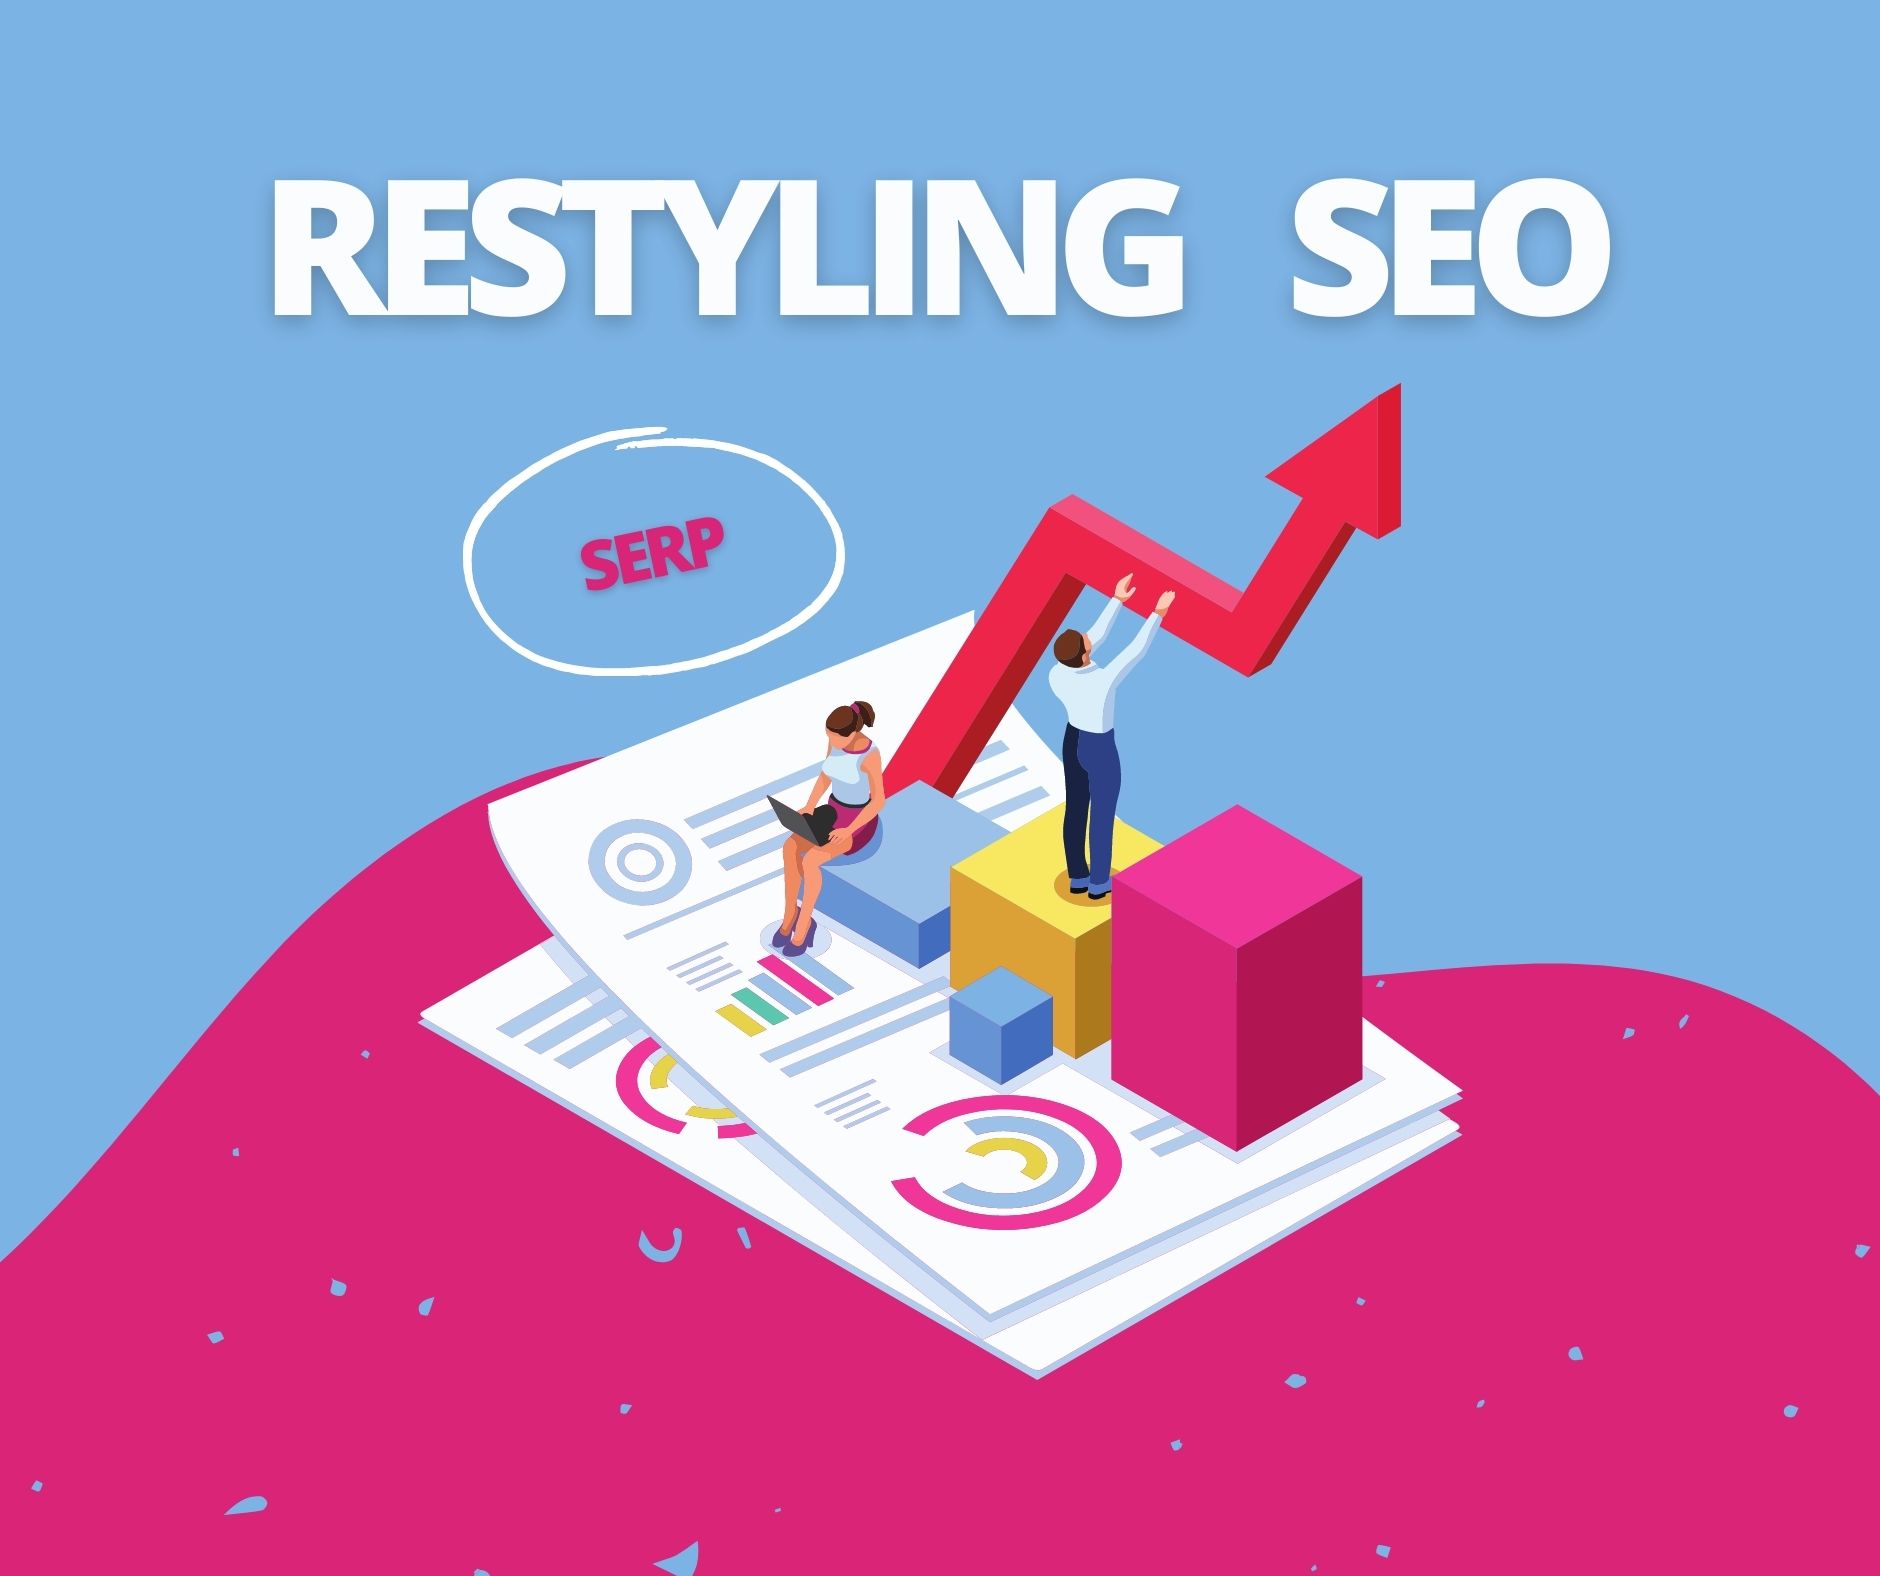 Restyling SEO